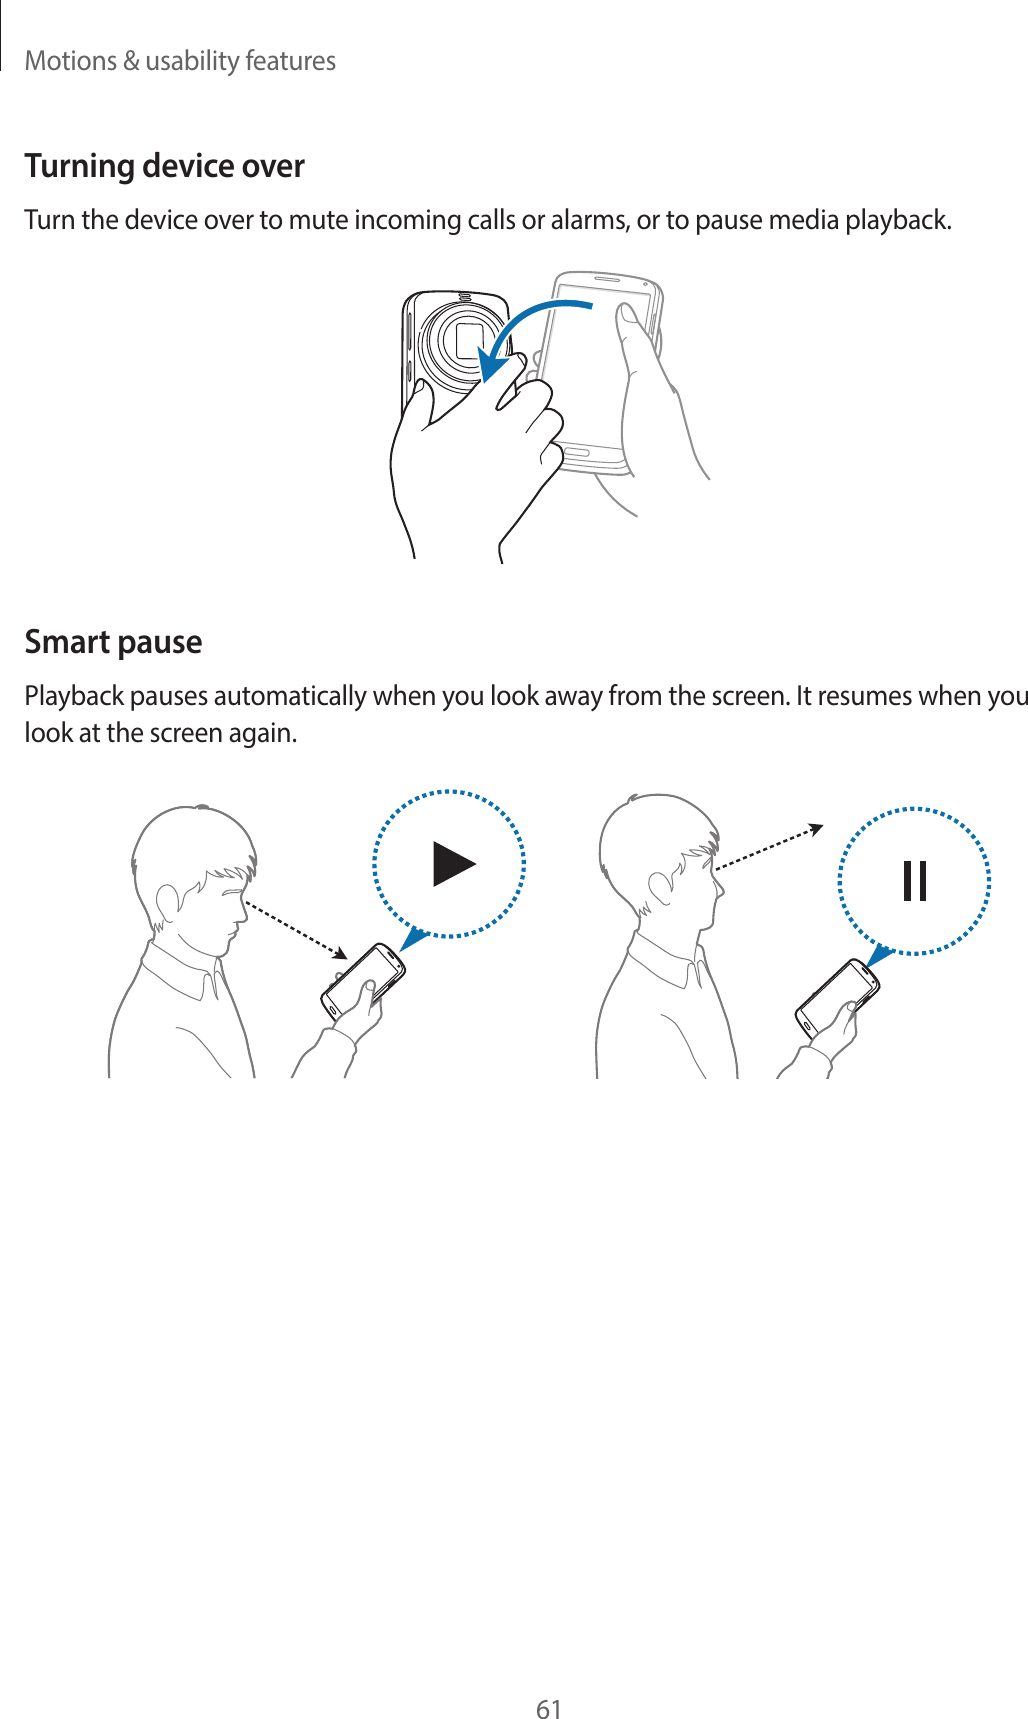 Motions &amp; usability features61Turning device overTurn the device over to mute incoming calls or alarms, or to pause media playback.Smart pausePlayback pauses automatically when you look away from the screen. It resumes when you look at the screen again.